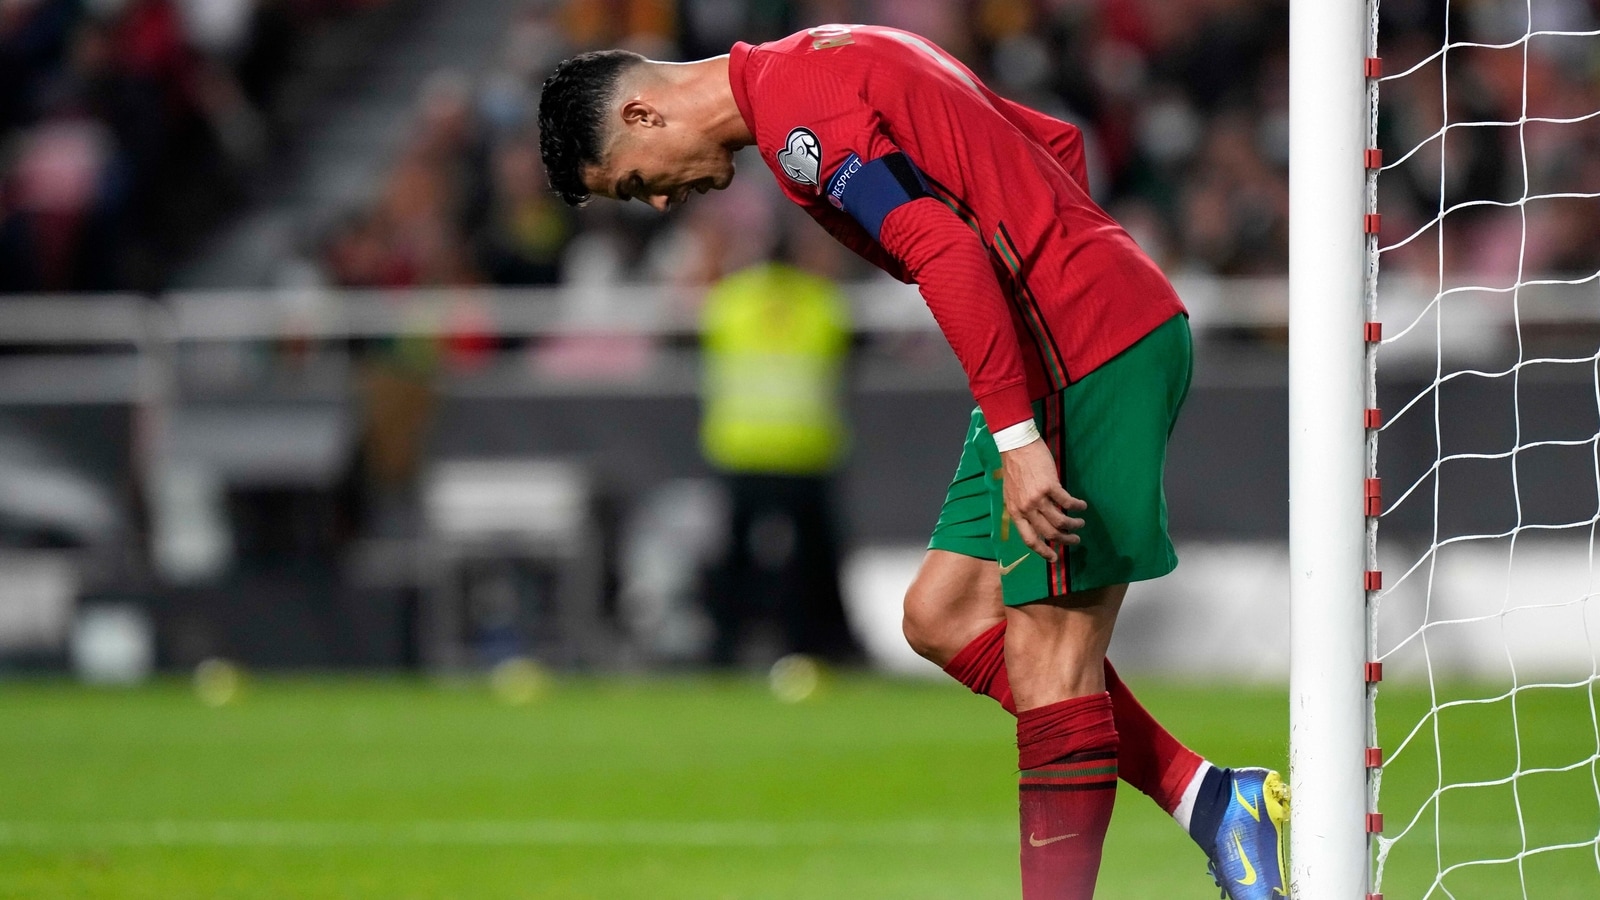 Cristiano Ronaldo: Portugal can overcome letdown after World Cup qualifying loss